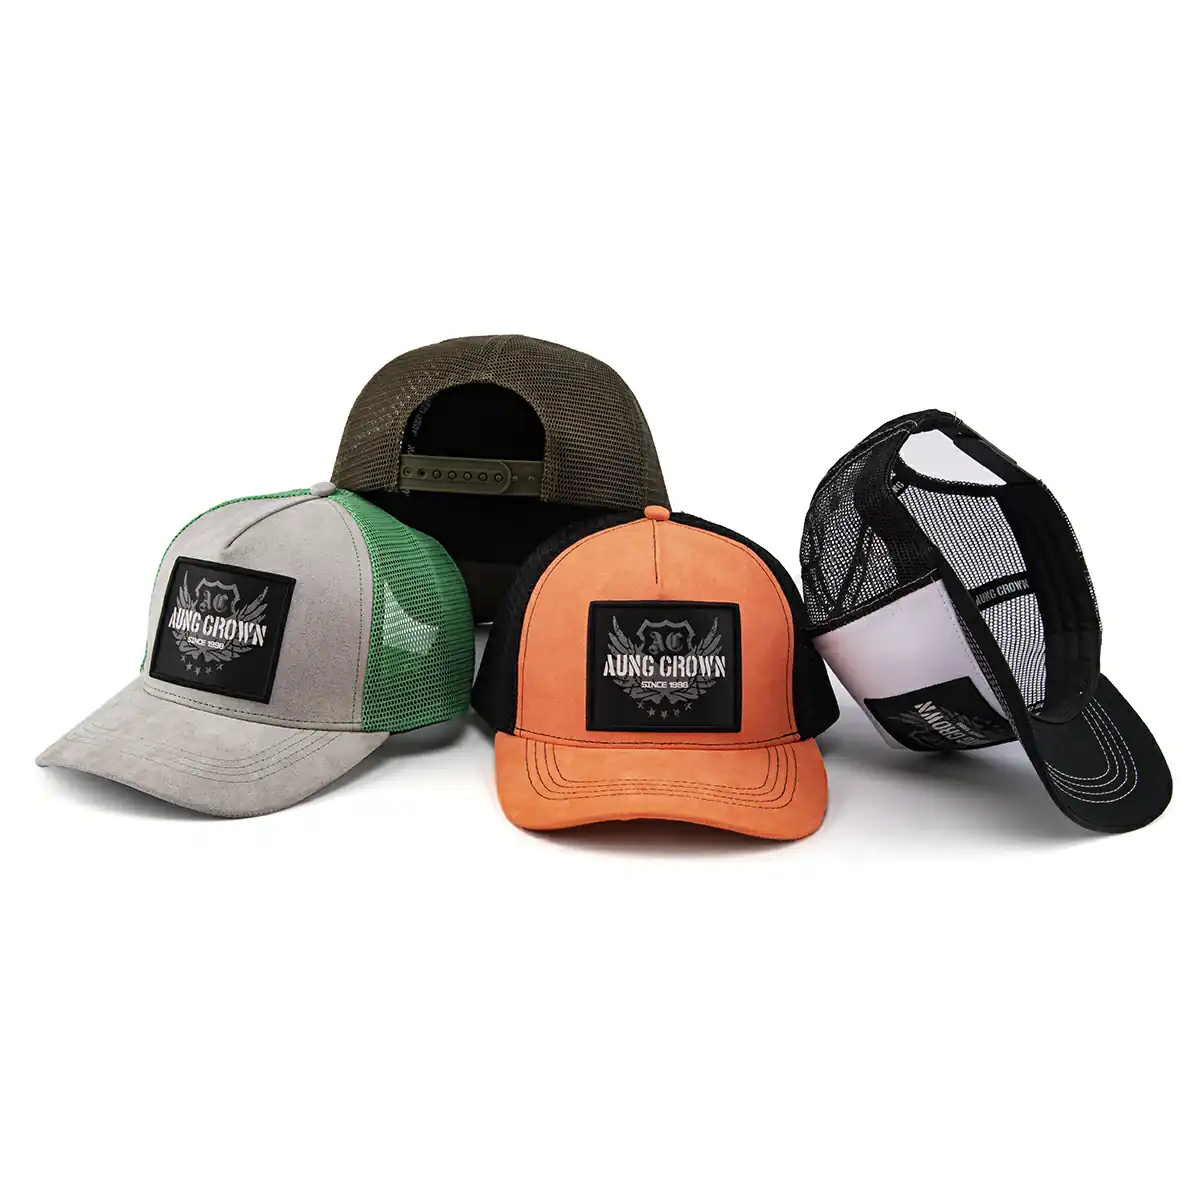 Aung Crown youth trucker hat for outdoors